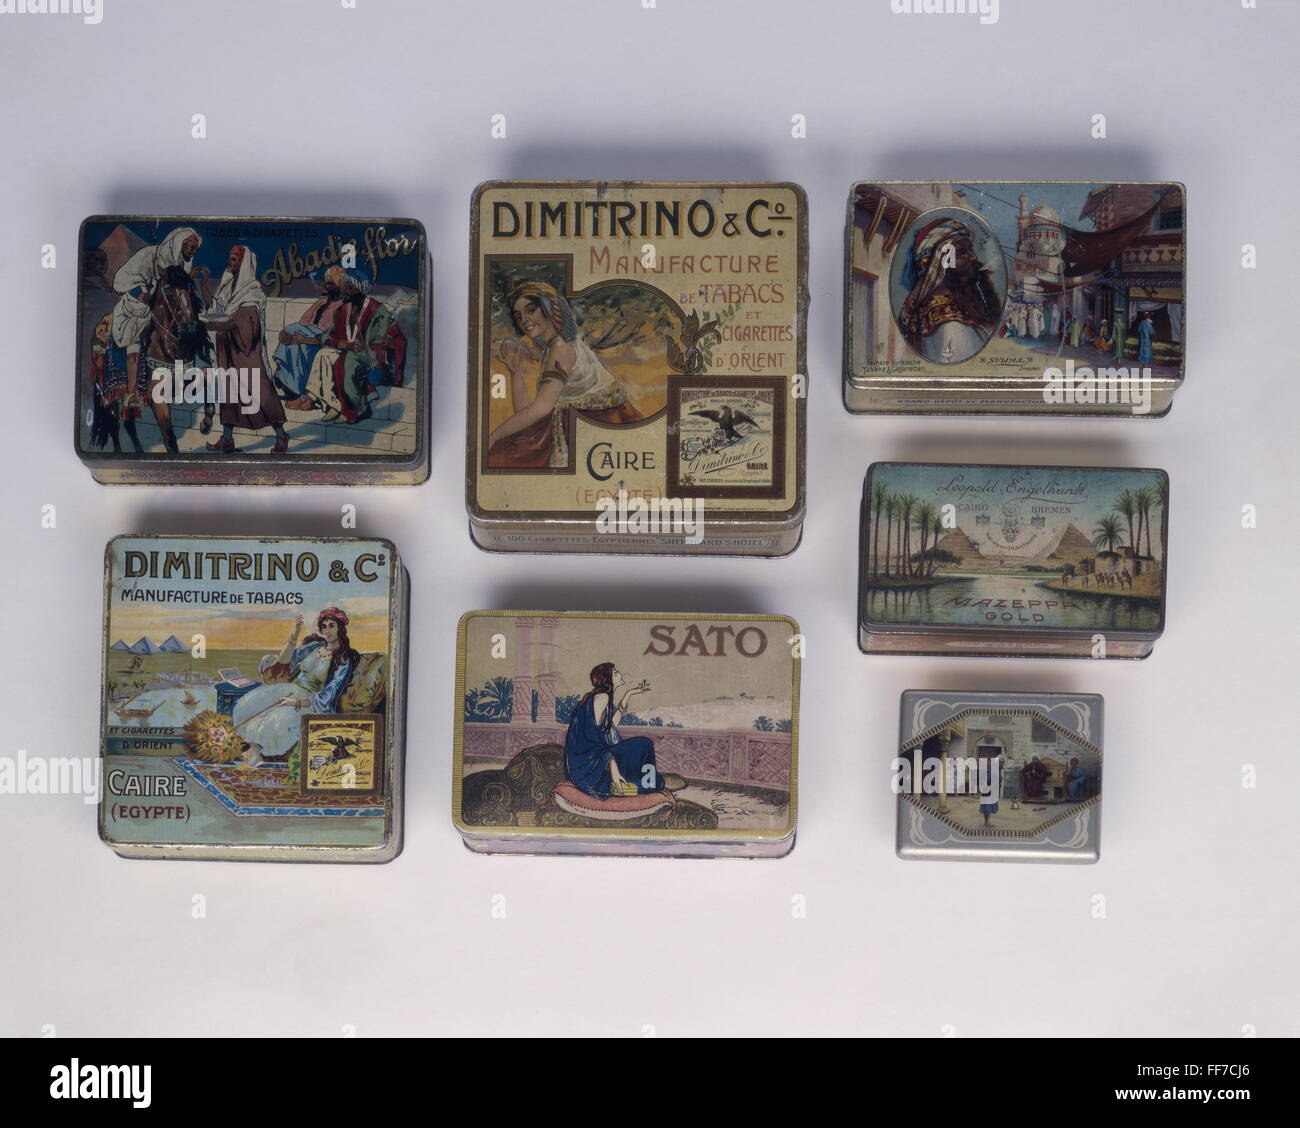 advertisement, tobacco, cigars, cigar boxes, sheet metal, painted, early 20th century, smoking, Orient, oriental, Eastern, Abadie Flor, Dimitrino, Sumila, Sato, historic, historical, people, 1900s, 1910s, Additional-Rights-Clearences-Not Available Stock Photo